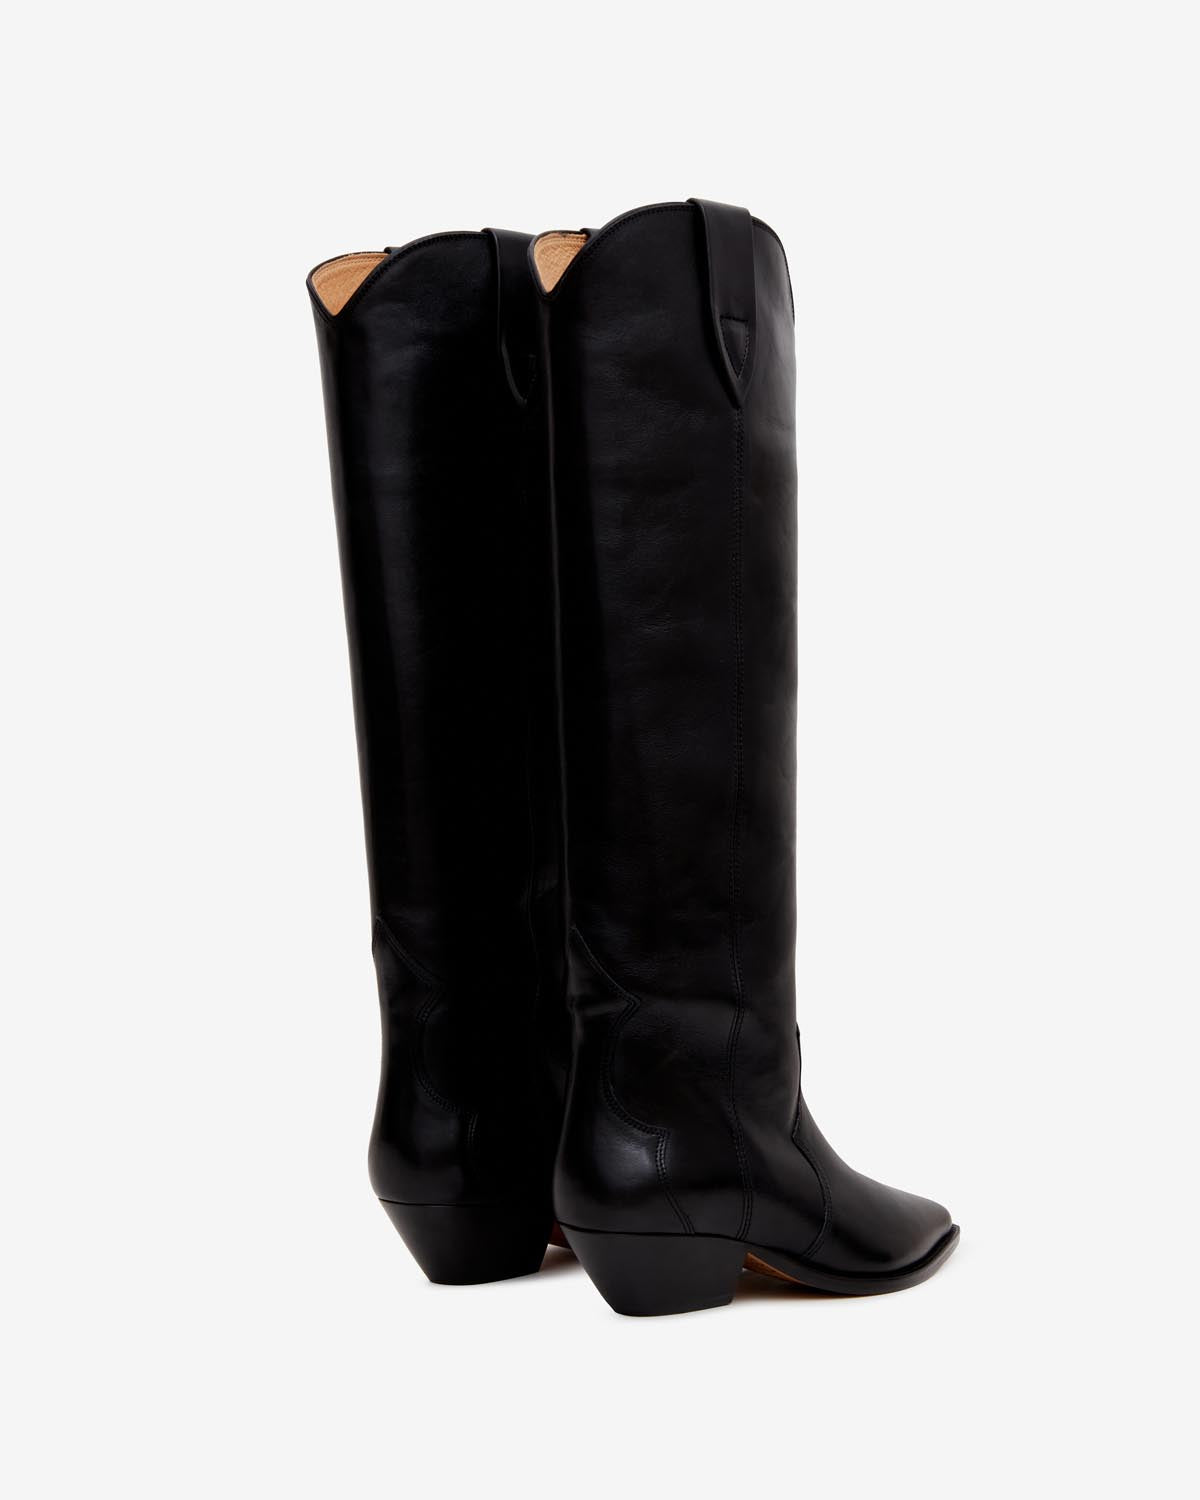 Boots and Low Boots | ISABEL MARANT Official Online Store